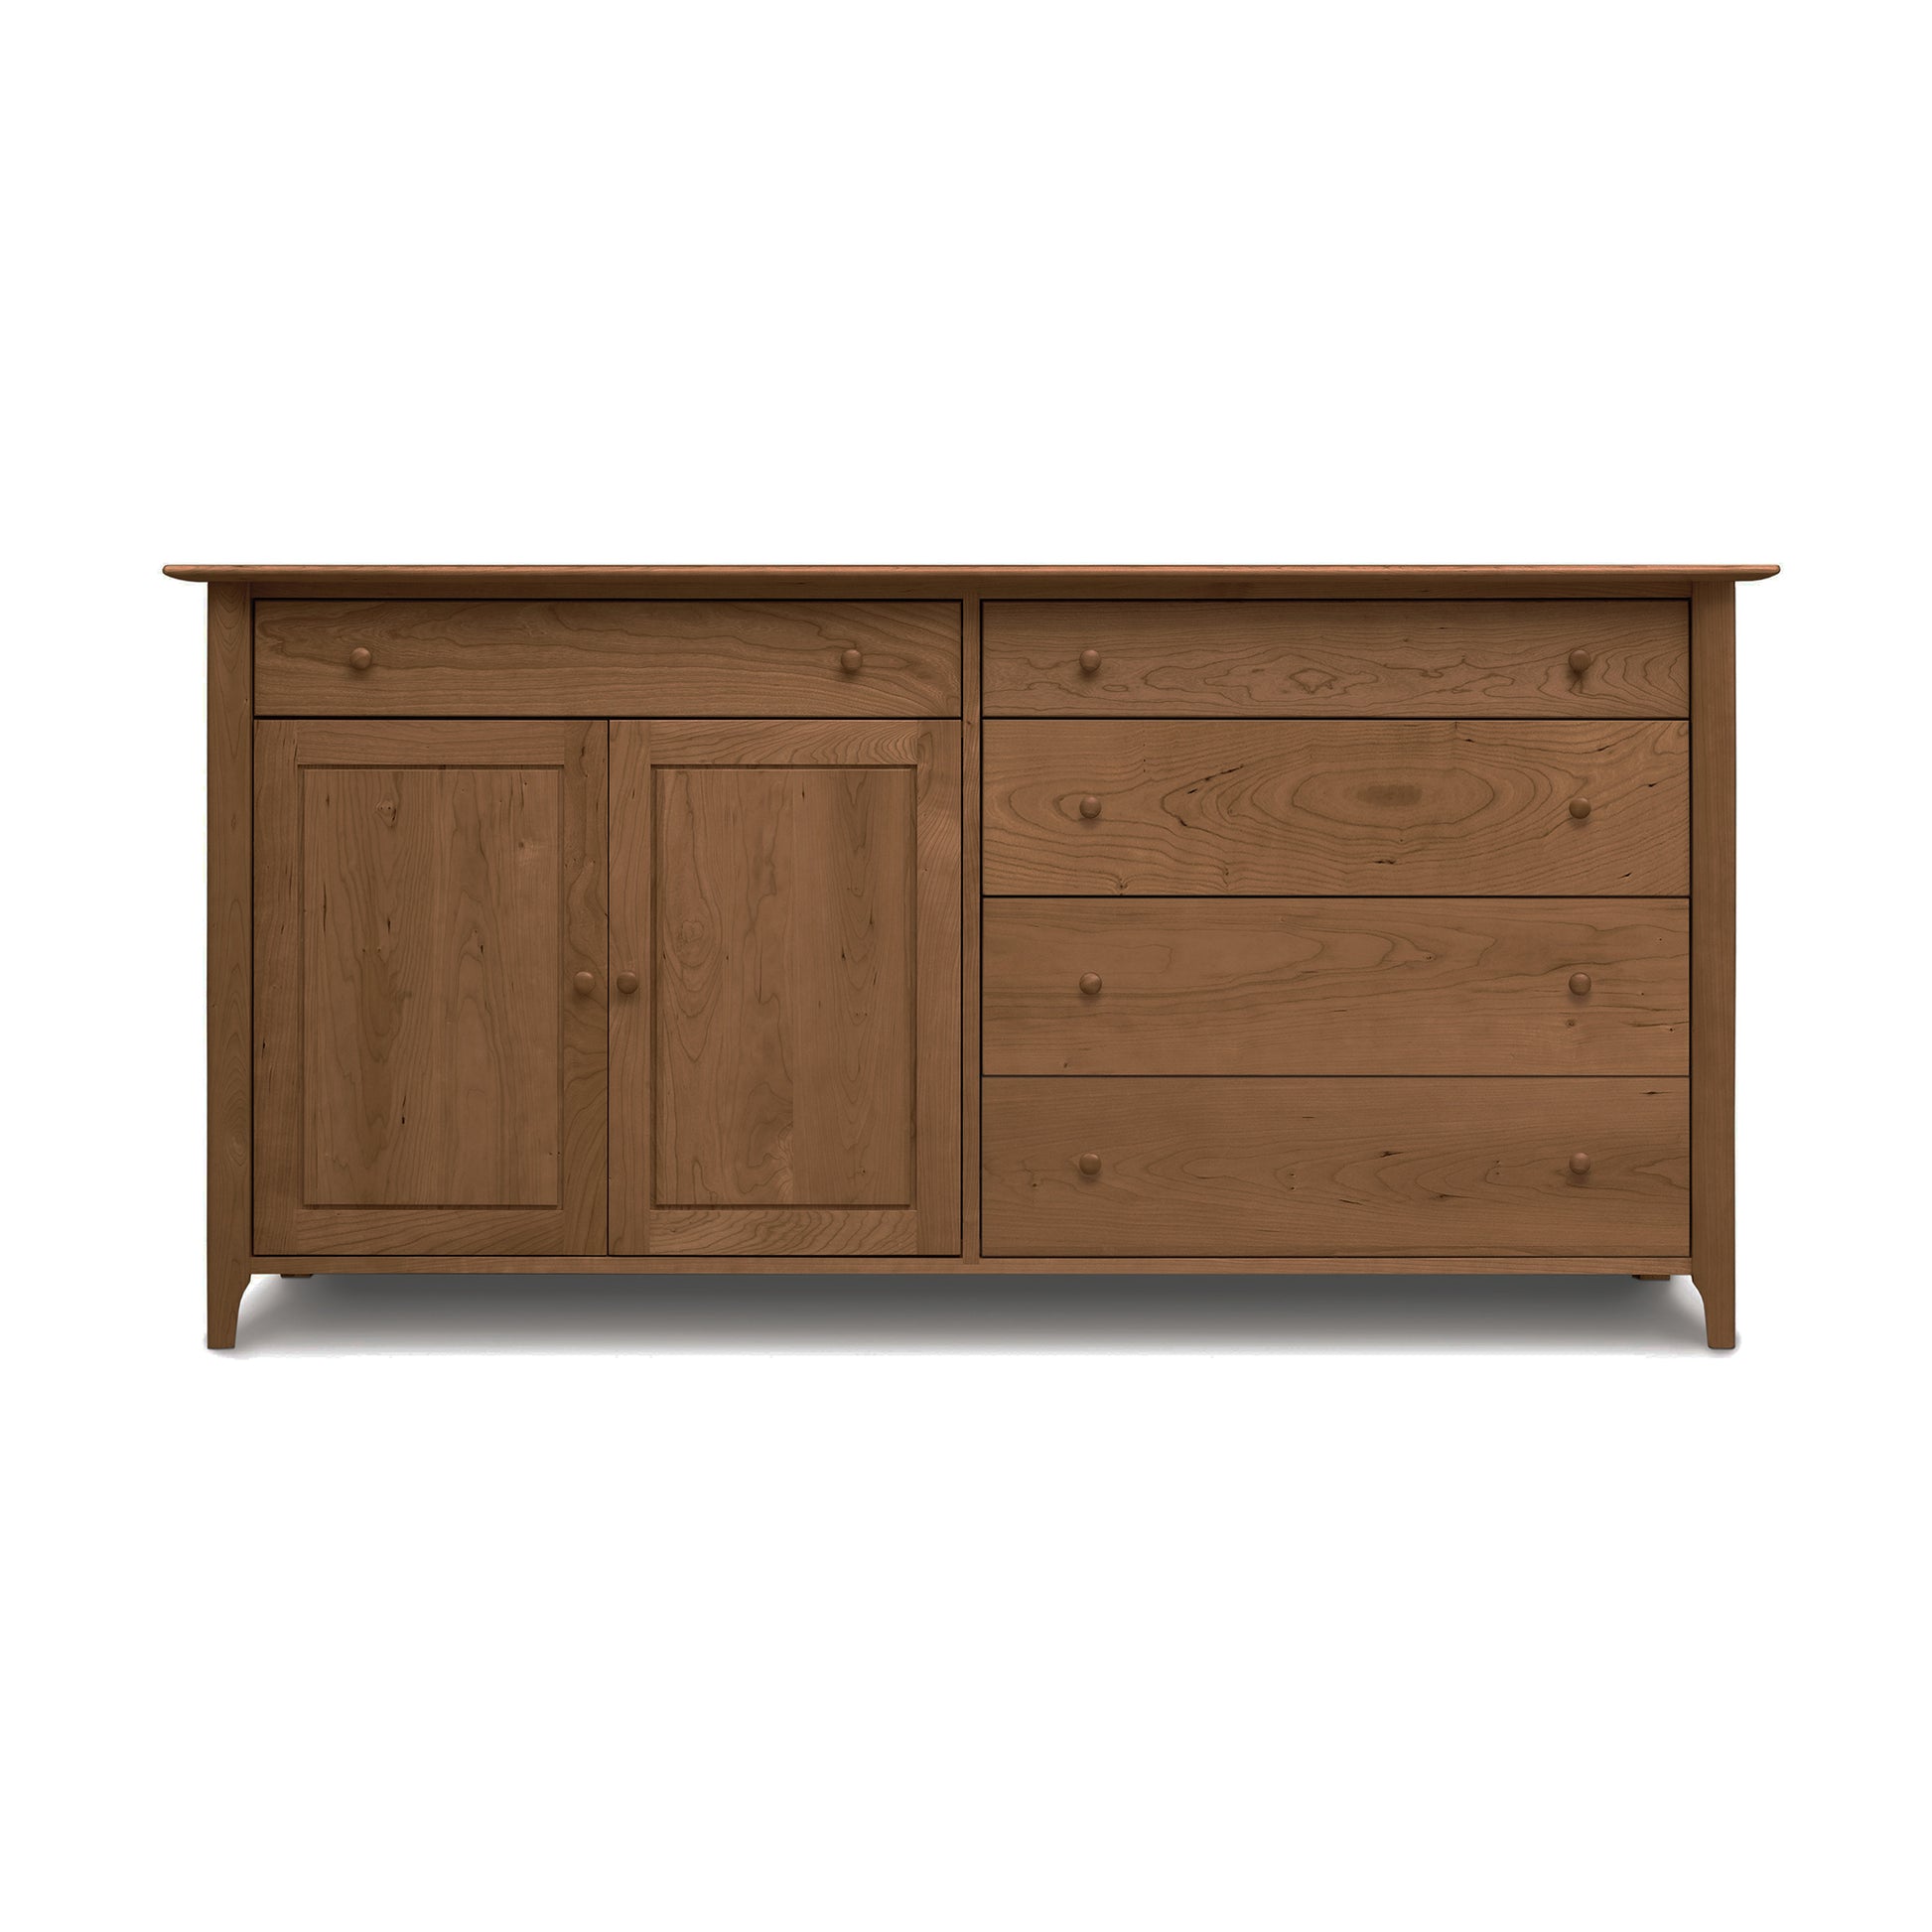 Wooden sideboard, Copeland Furniture's Sarah 2 Door, 5 Drawer Buffet, with two doors and three drawers on a plain background.